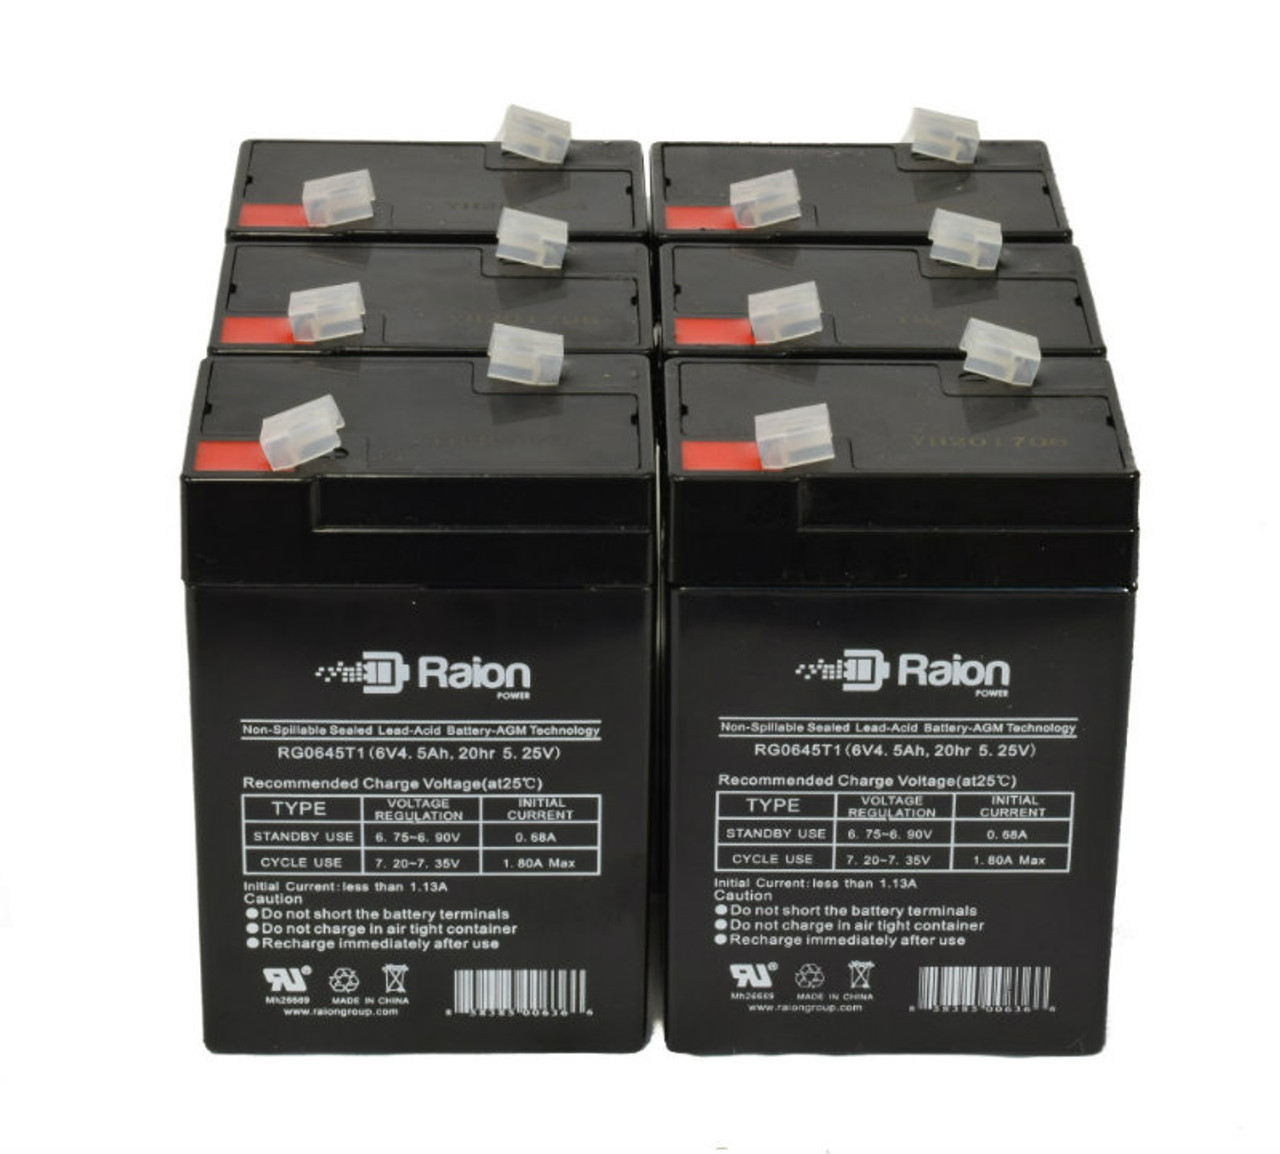 Raion Power 6 Volt 4.5Ah RG0645T1 Replacement Battery for Kaiying KS5-6Z - 6 Pack